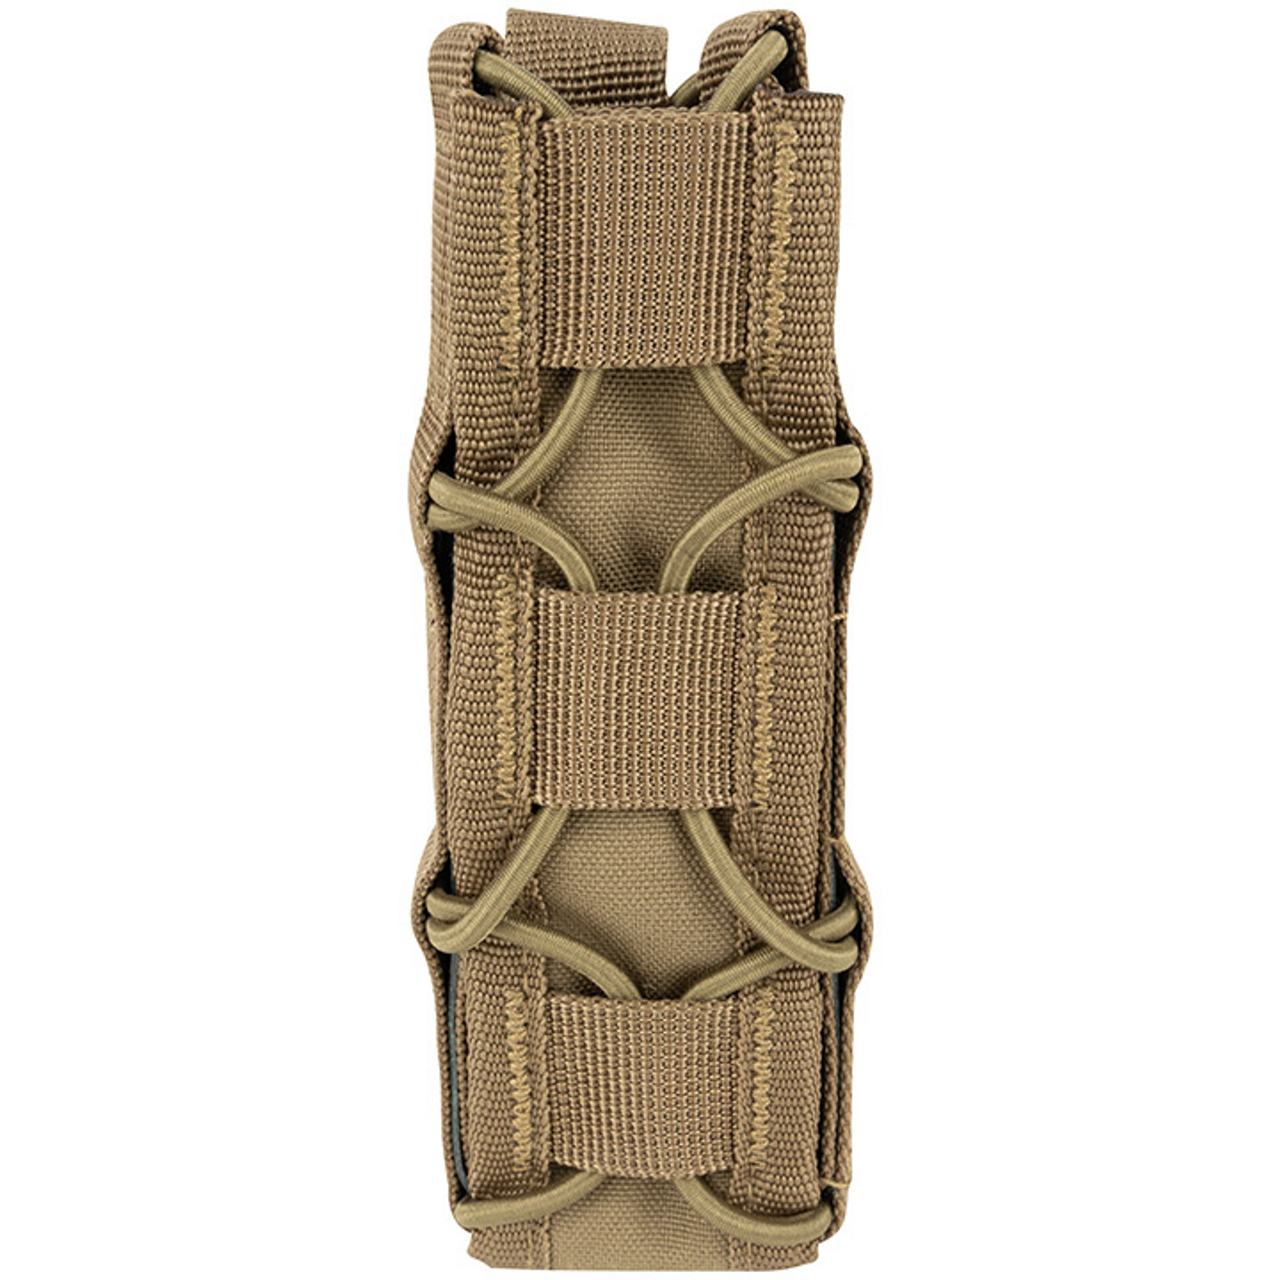 Viper Elite Extended Pistol Mag Pouch - Dark Coyote